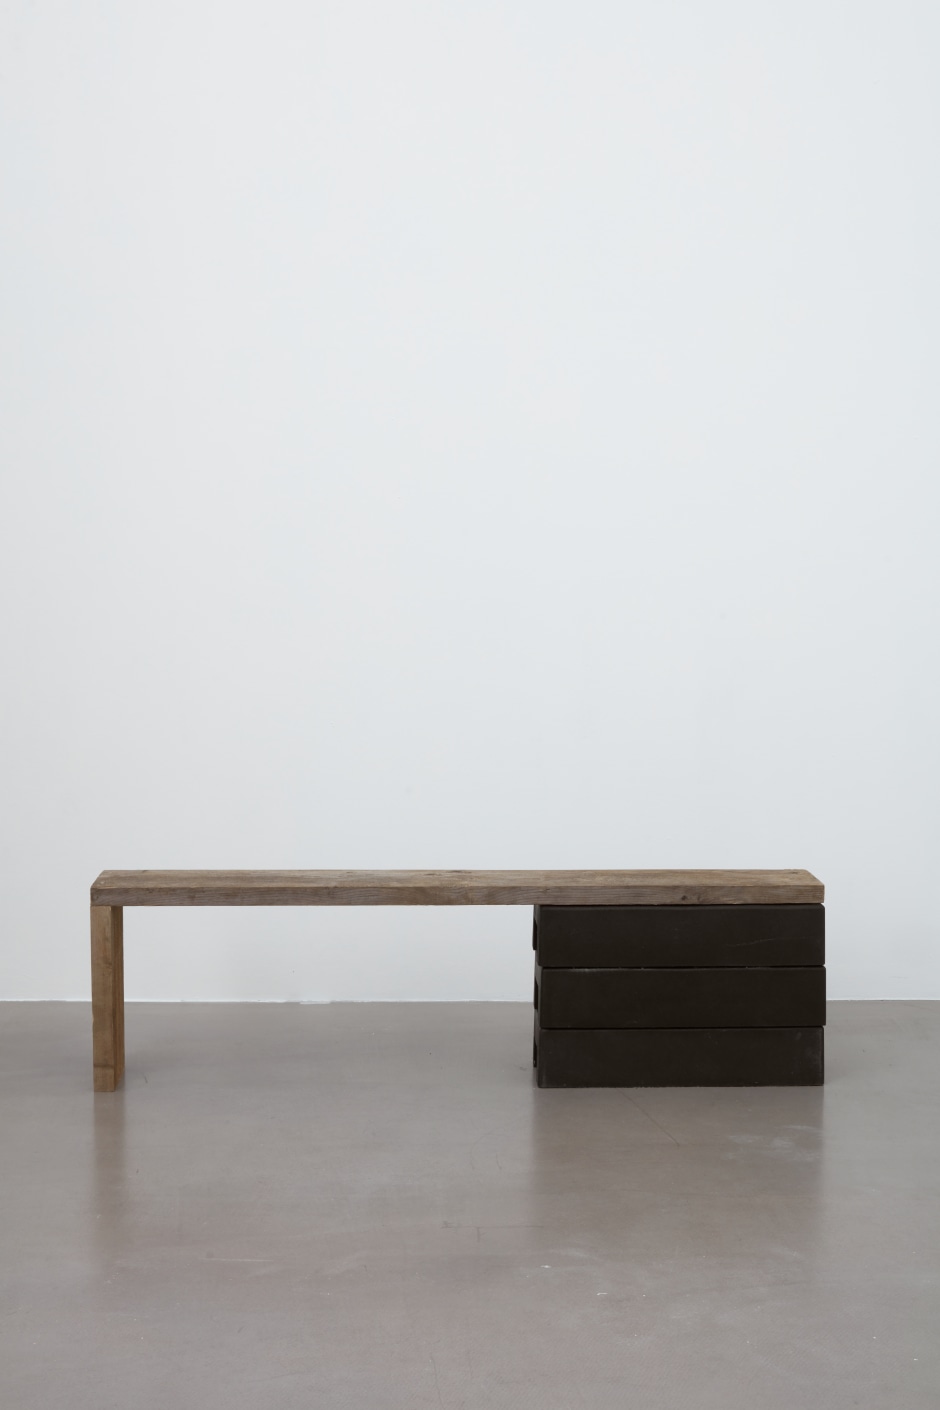 Untitled (bench) , 2020  rubber, wood  48.5 x 171 x 24.5 cm / 19 ⅛ x 67 ⅜ x 9 ⅝ in